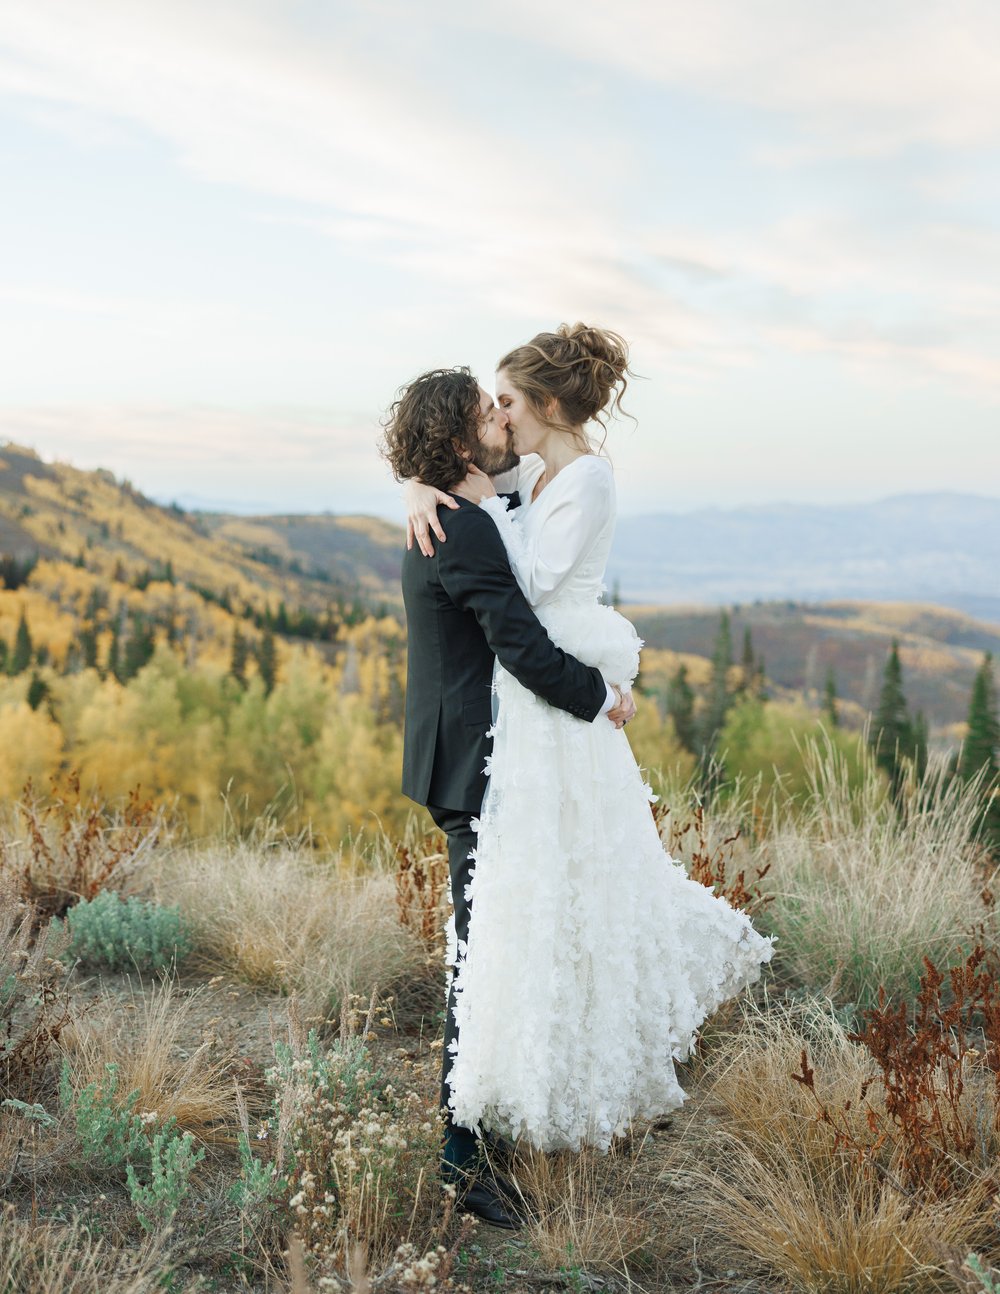  A timeless portrait of a bride and groom kissing in the Utah Mountains by Savanna Richardson Photography. classy timeless stunning #SavannaRichardsonPhotography #SavannaRichardsonFormals #CottonwoodCanyon #WeddingFormals #SLCWedding #fallwed 